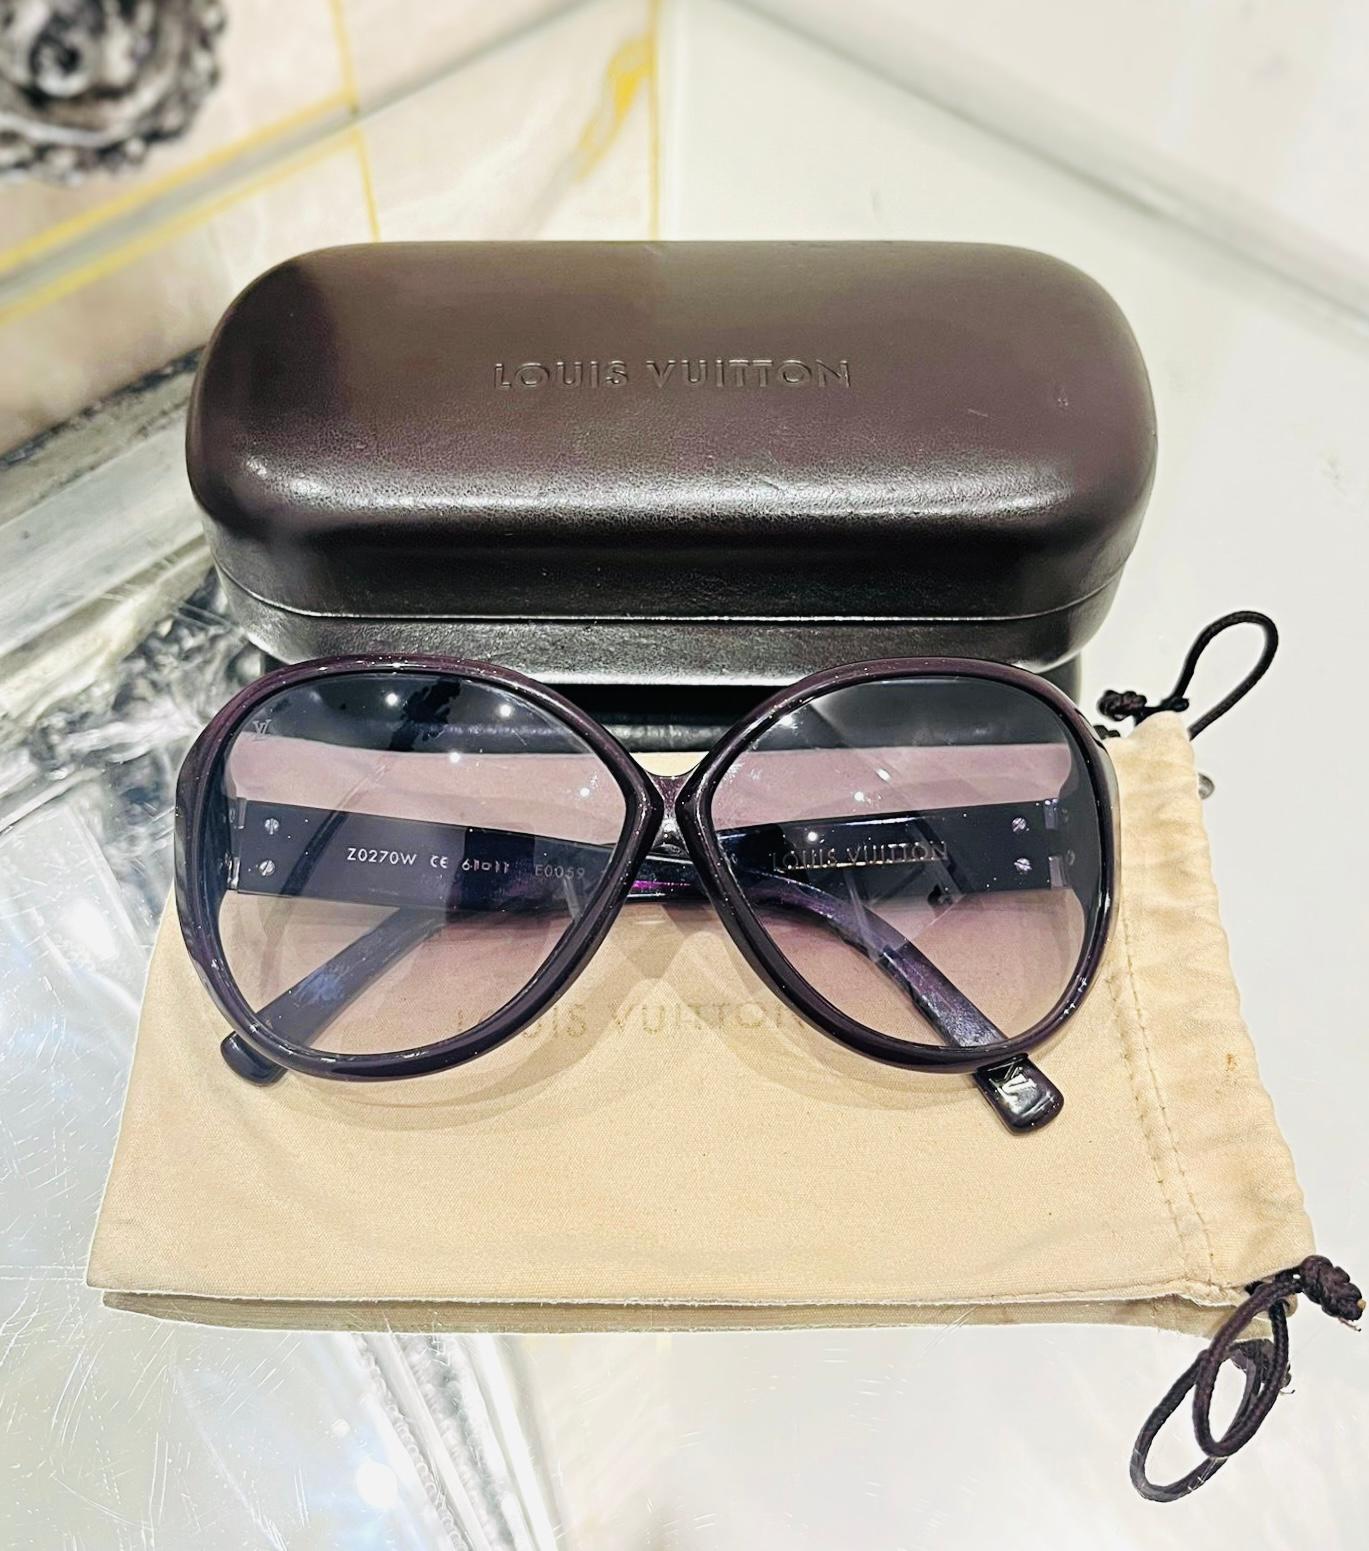 Louis Vuitton Oversized Sunglasses In Excellent Condition For Sale In London, GB